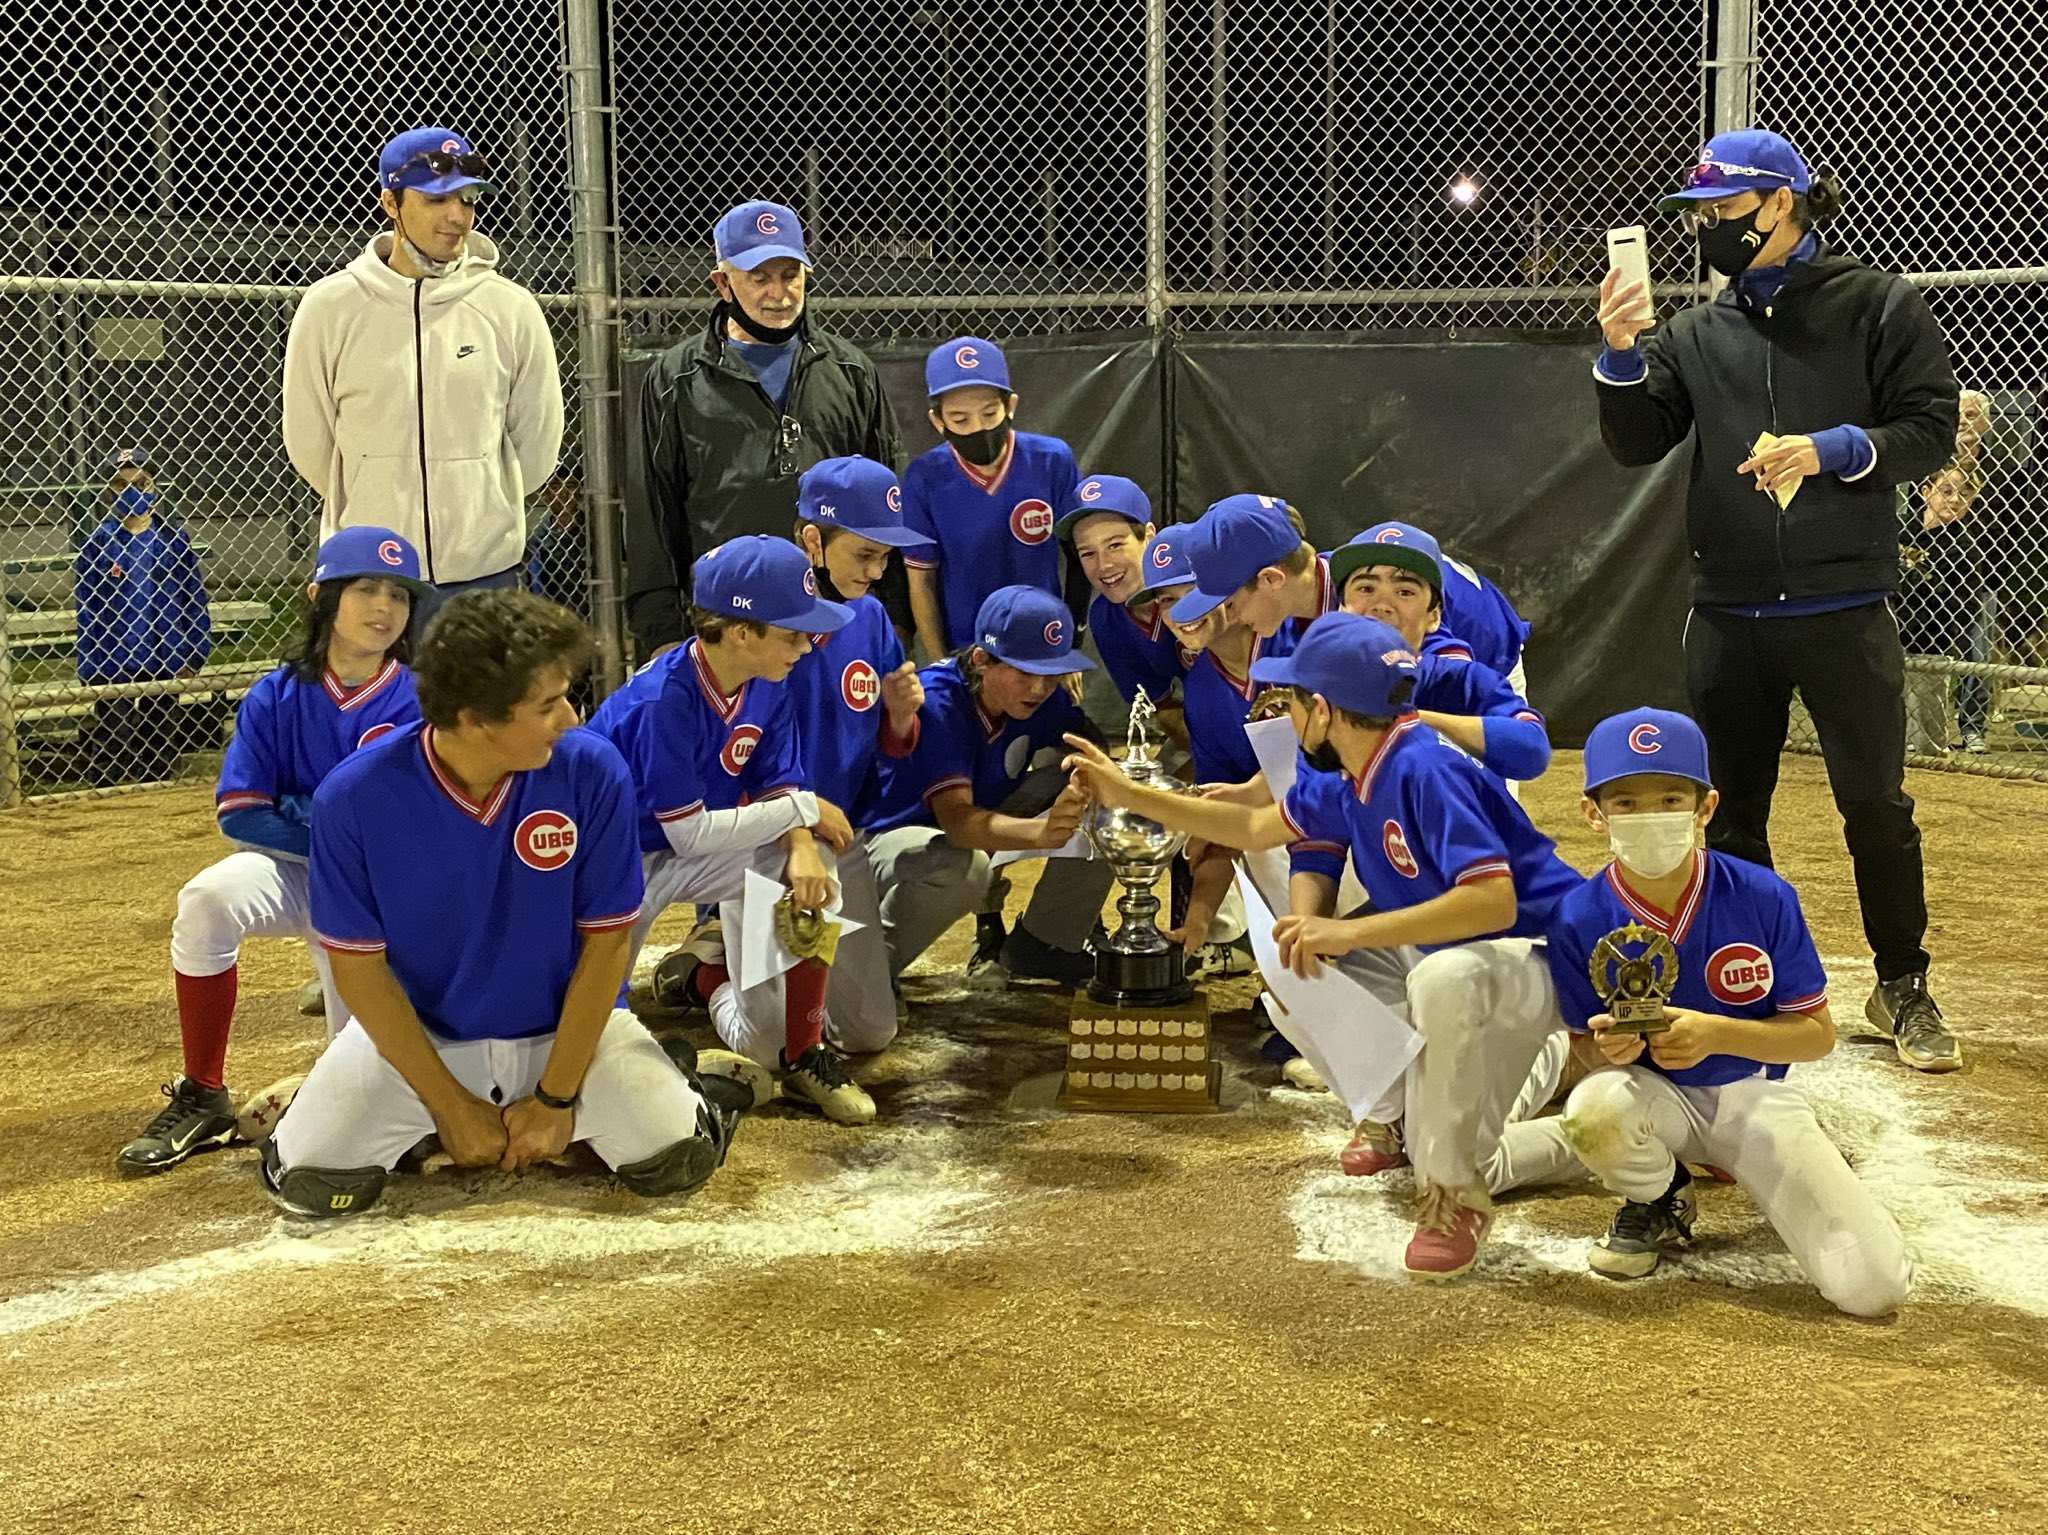 High Park Little League on X: Champions! Congratulations to the